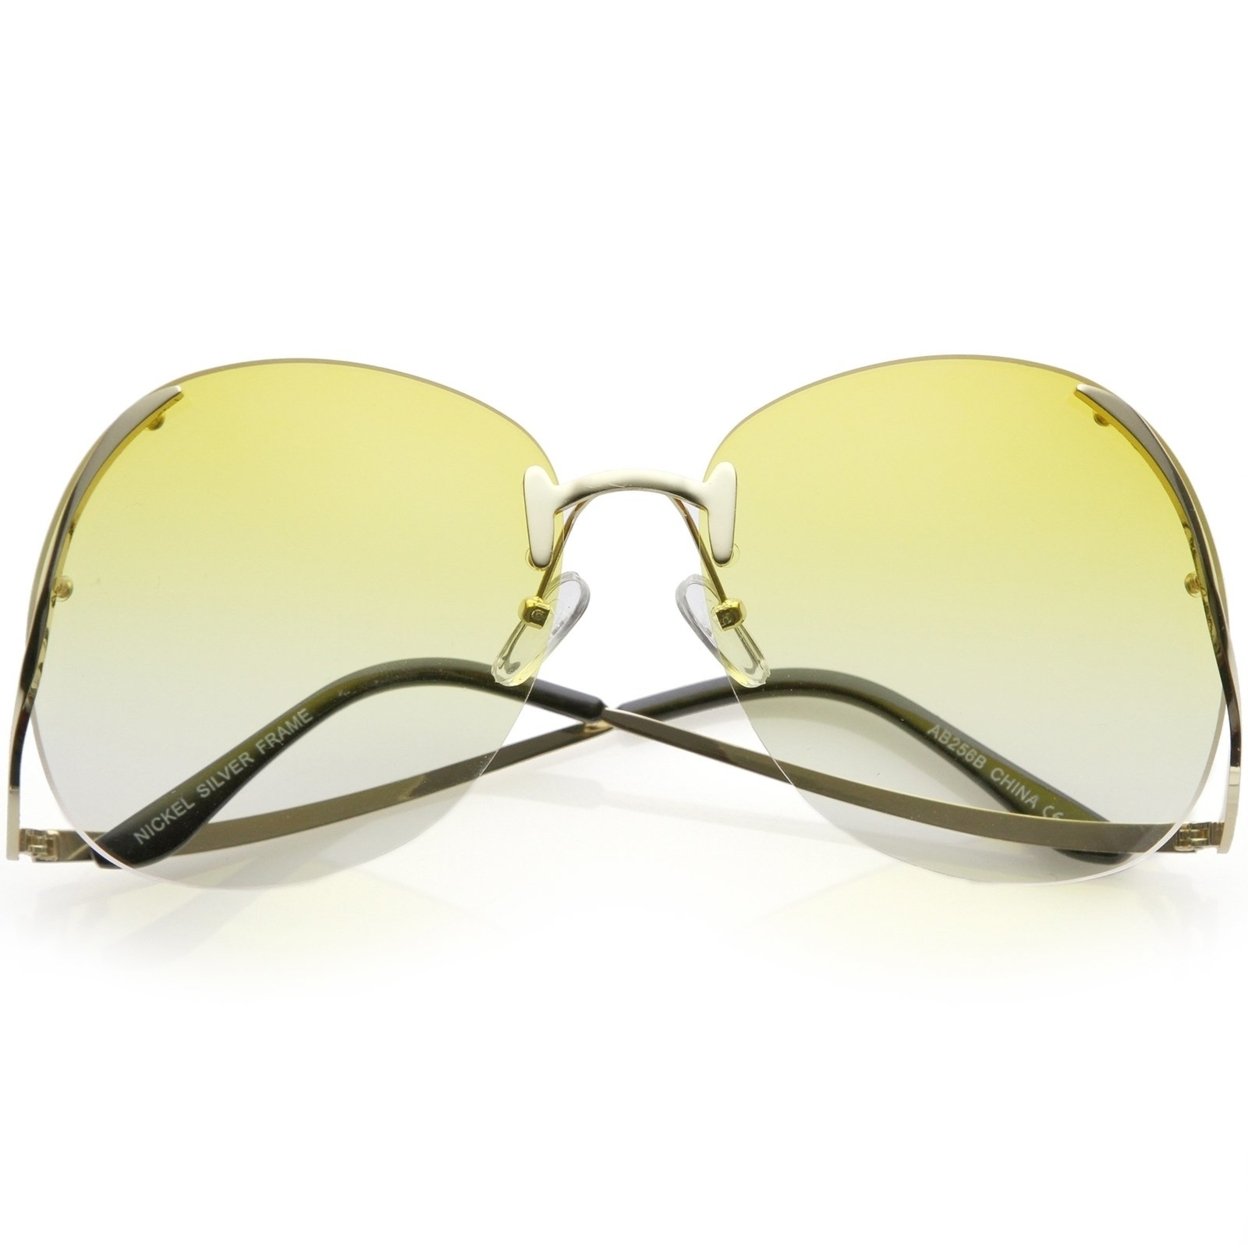 Women's Rimless Oversize Sunglasses Curved Metal Arms Round Color Tinted Lens 67mm - Gold / Yellow Gradient